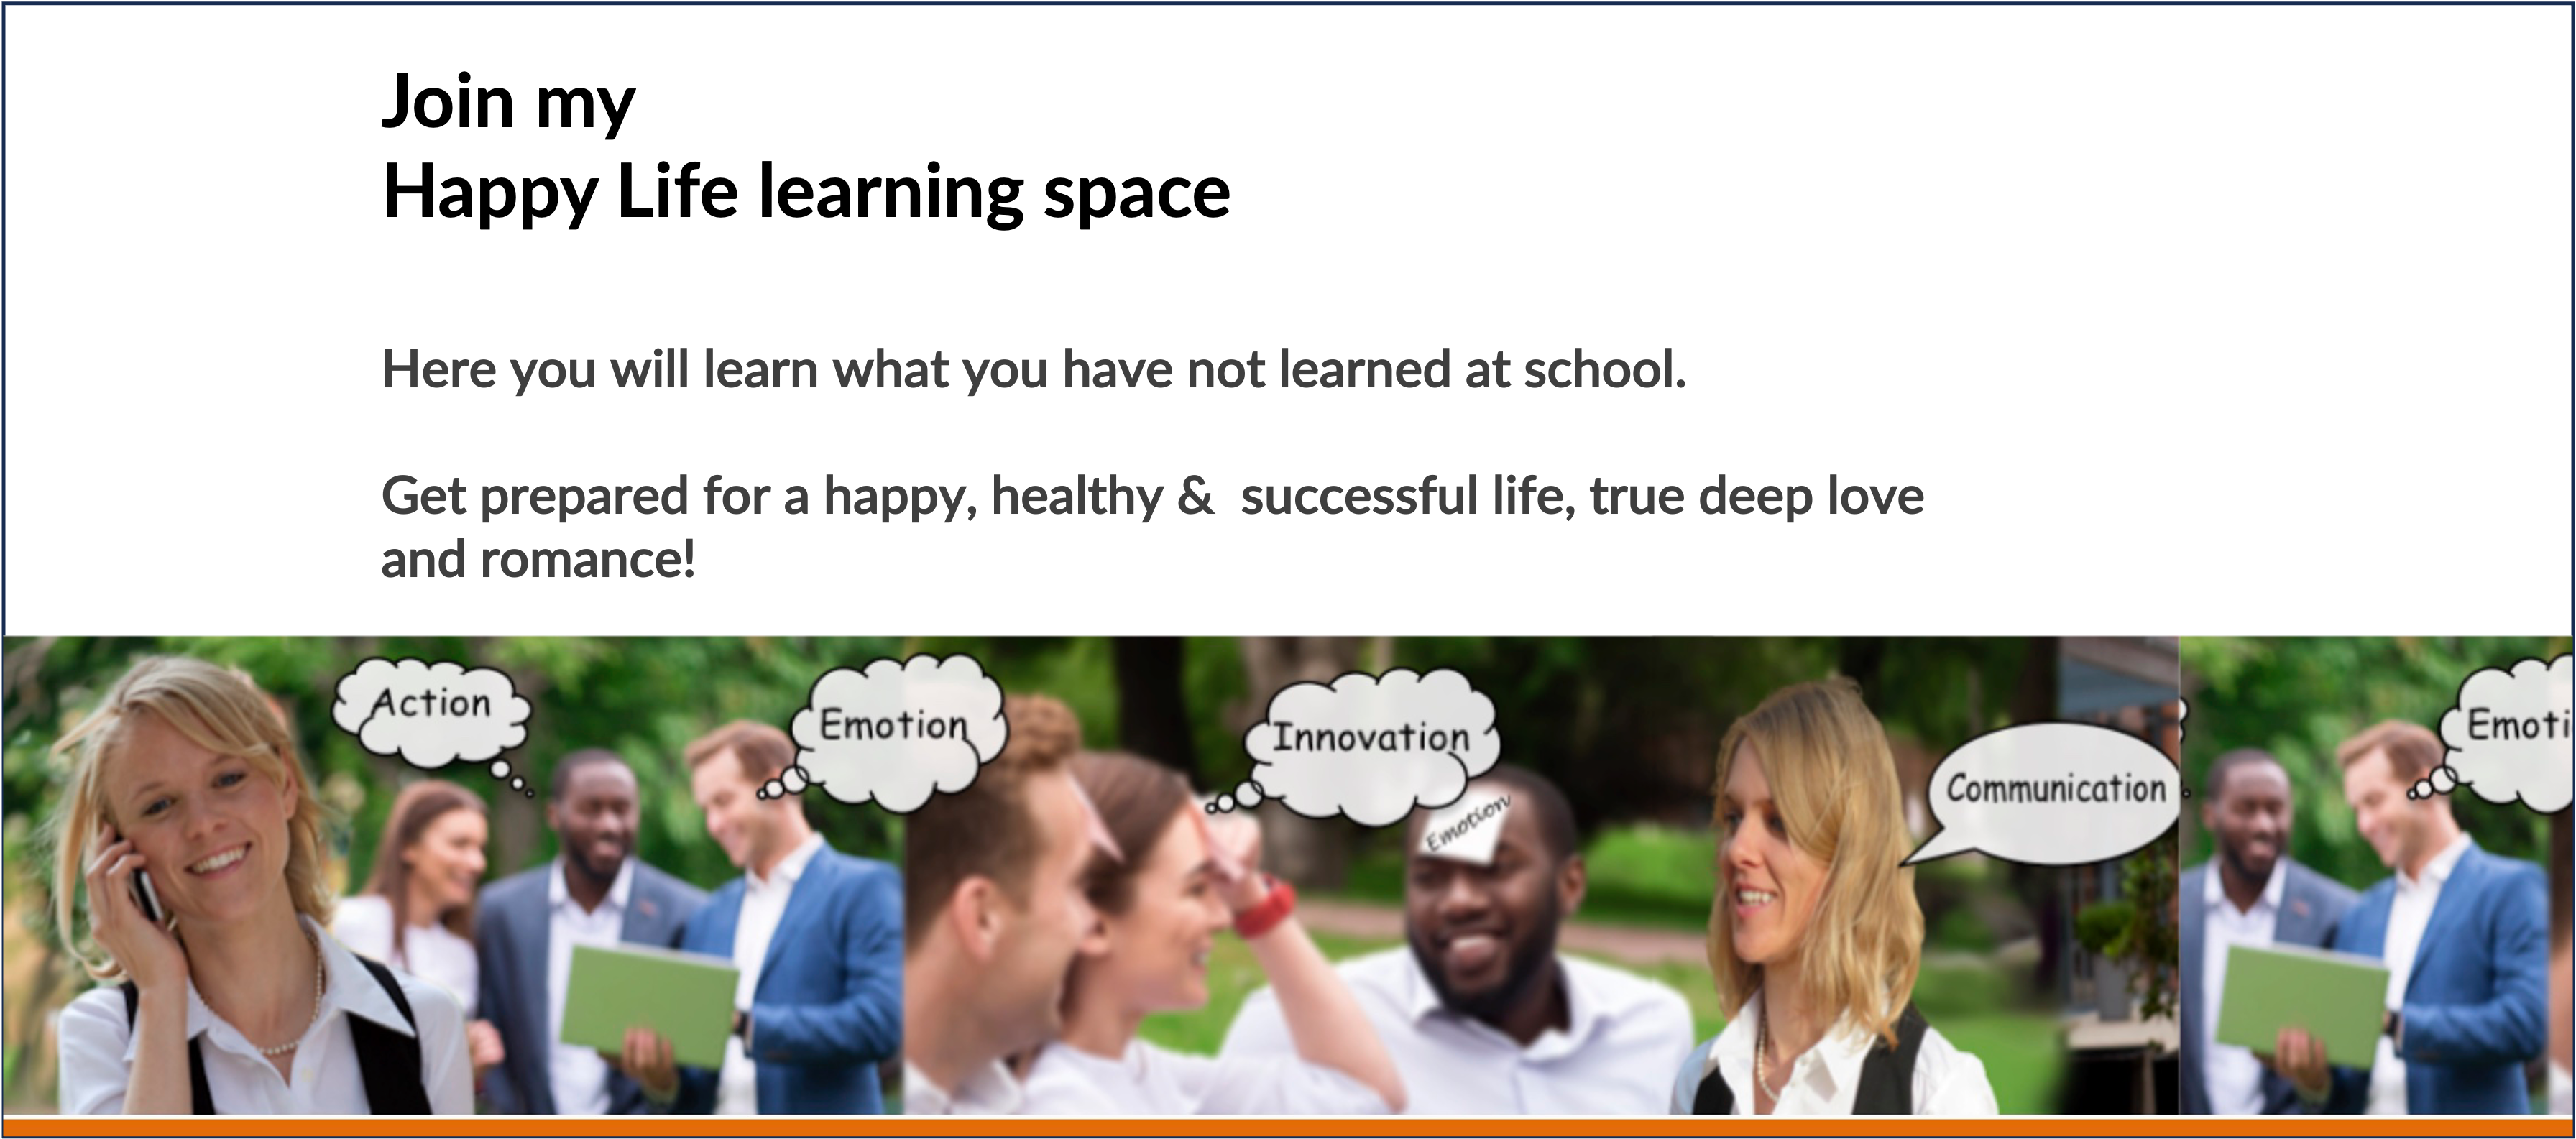 Join my Happy Life learning space